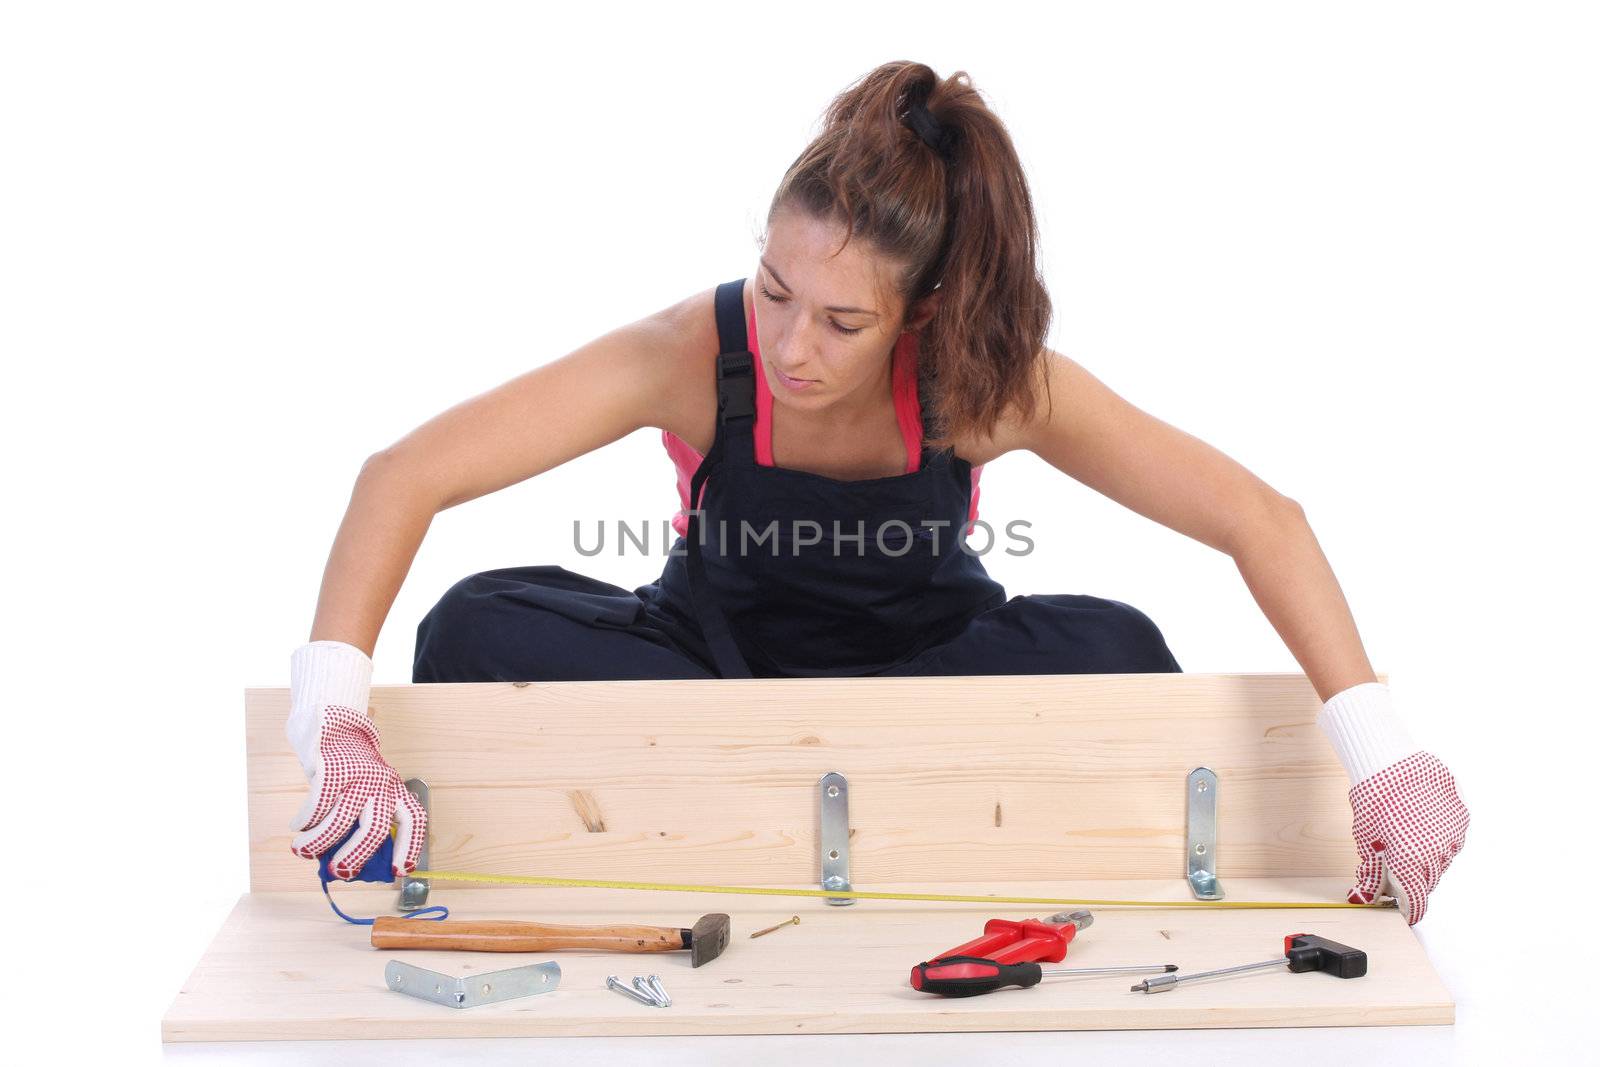 woman carpenter at work on white background 